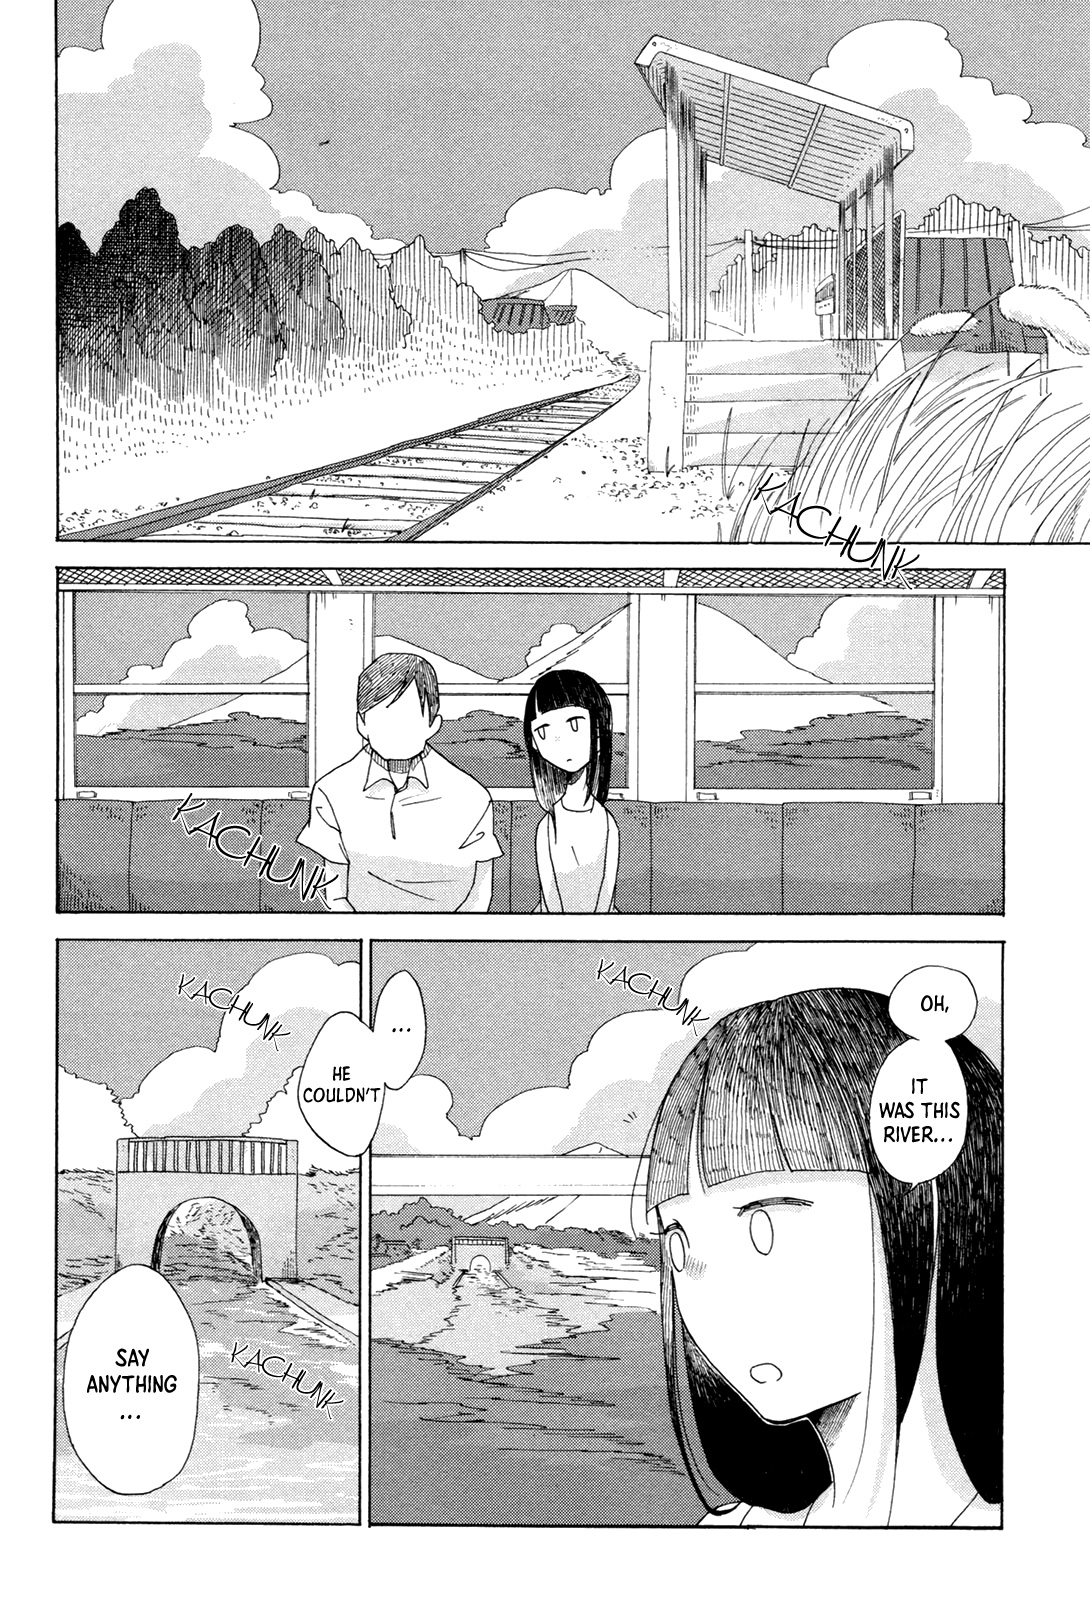 Life is Full of Good byes Vol. 1 Ch. 1 Sister's Departure